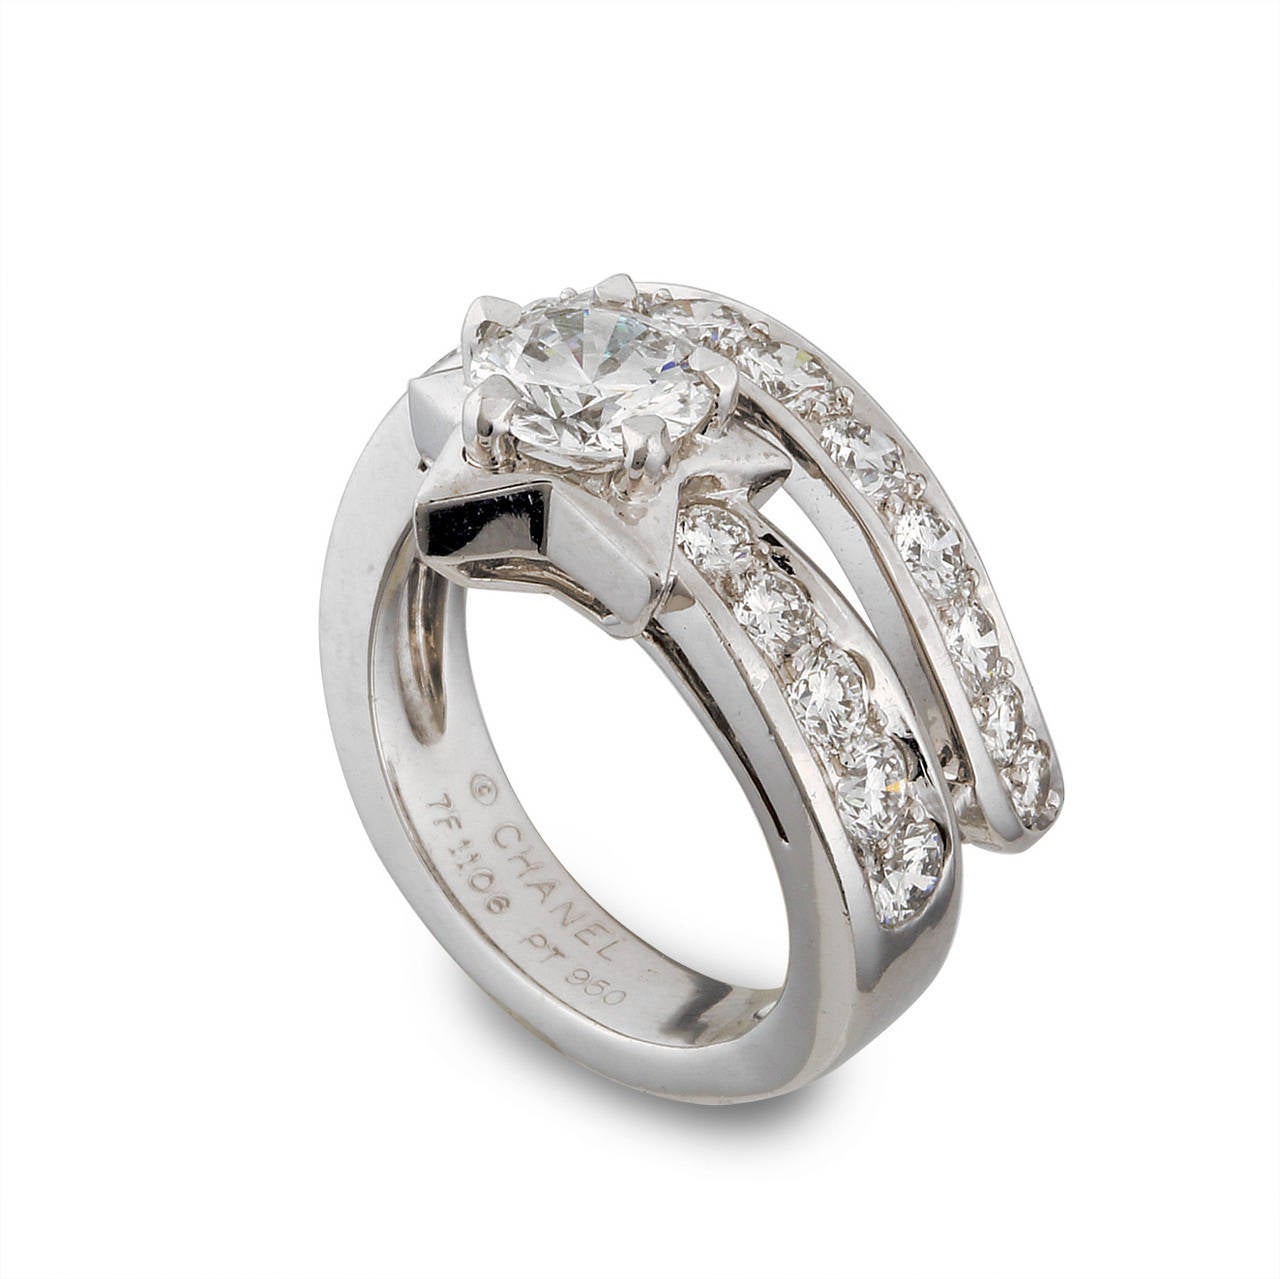 Lavish your collection with an elegant platinum and diamond ring from Chanel! This captivating ring from Chanel's Comete Collection features a wrapping band of diamonds accented by star.